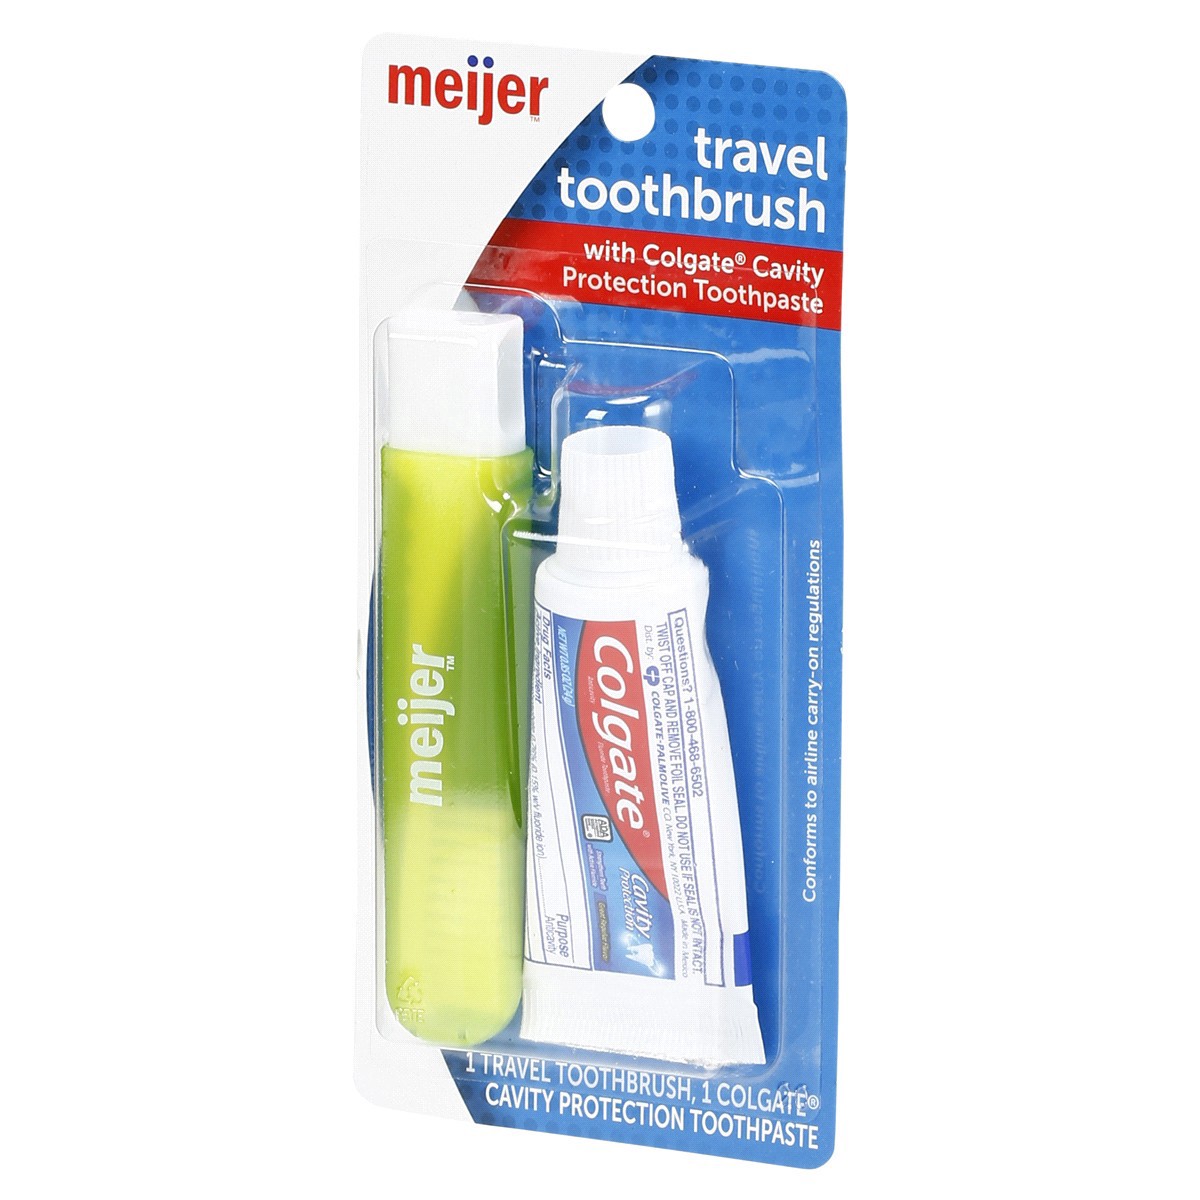 slide 9 of 29, Meijer Travel Toothbrush with Colgate Toothpaste, 1 Kit, .85 OZ